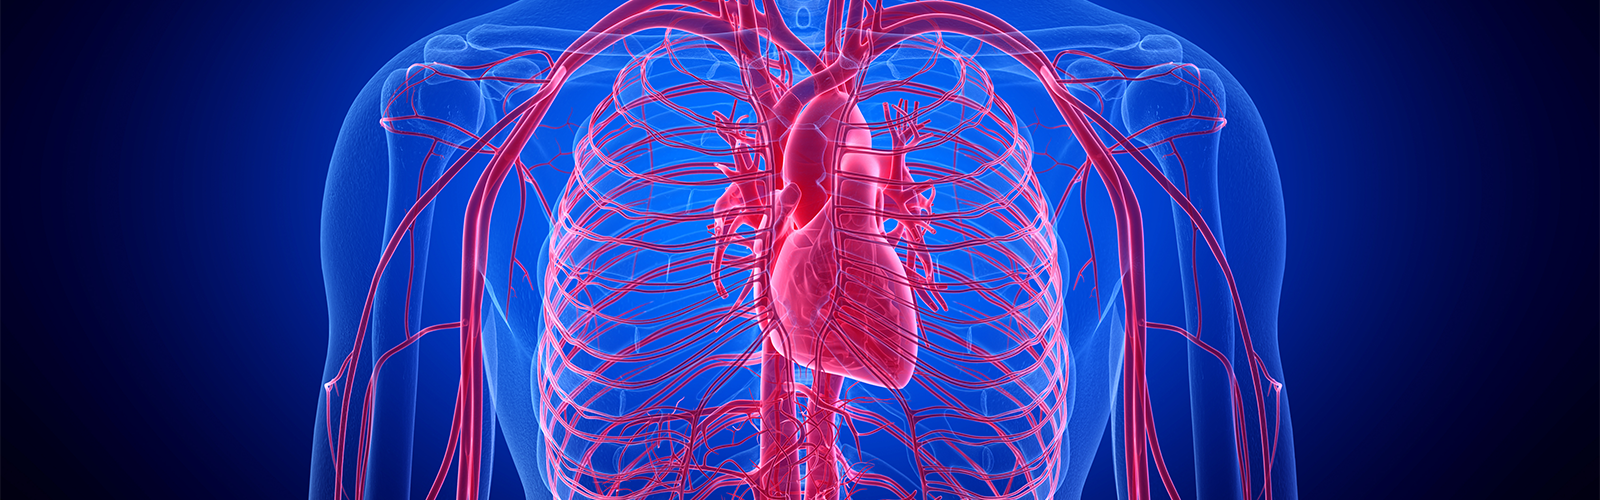 Artificial Testosterone Boosters Linked To Cardiovascular Disease